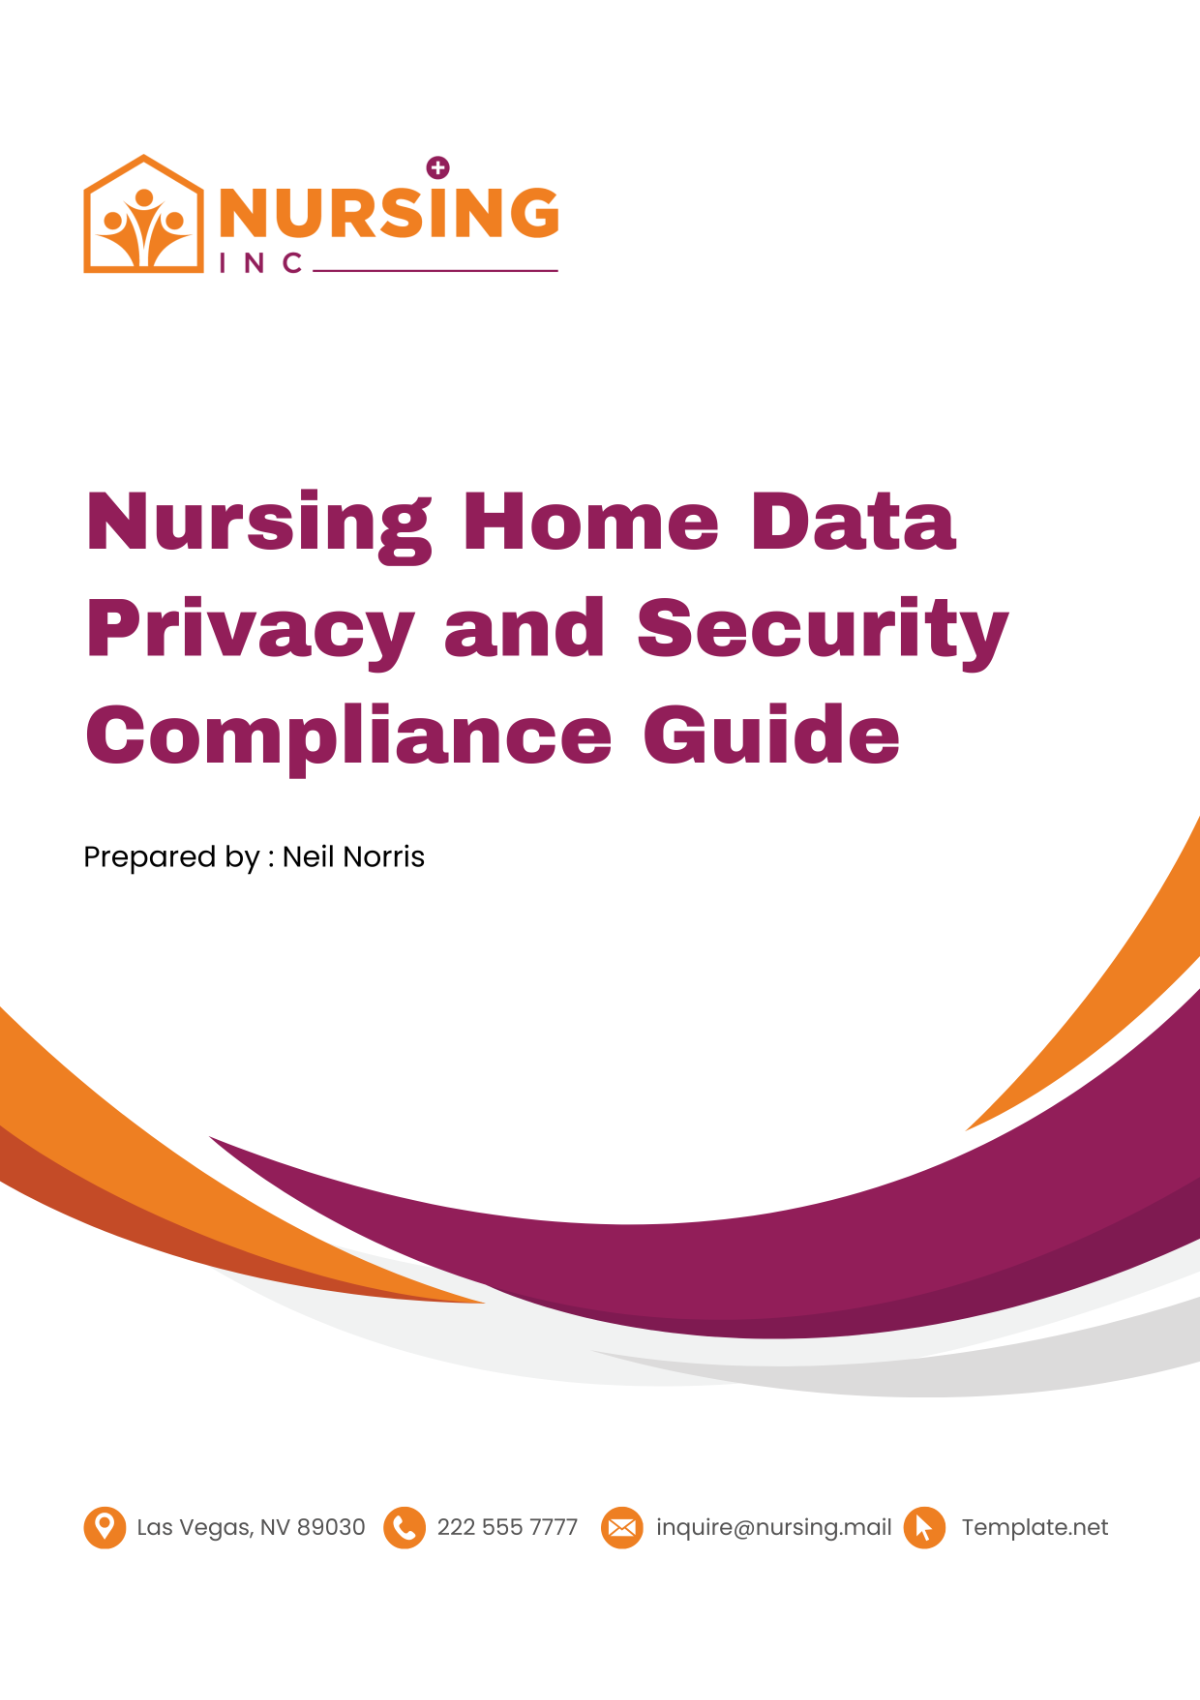 Free Nursing Home Data Privacy and Security Compliance Guide Template